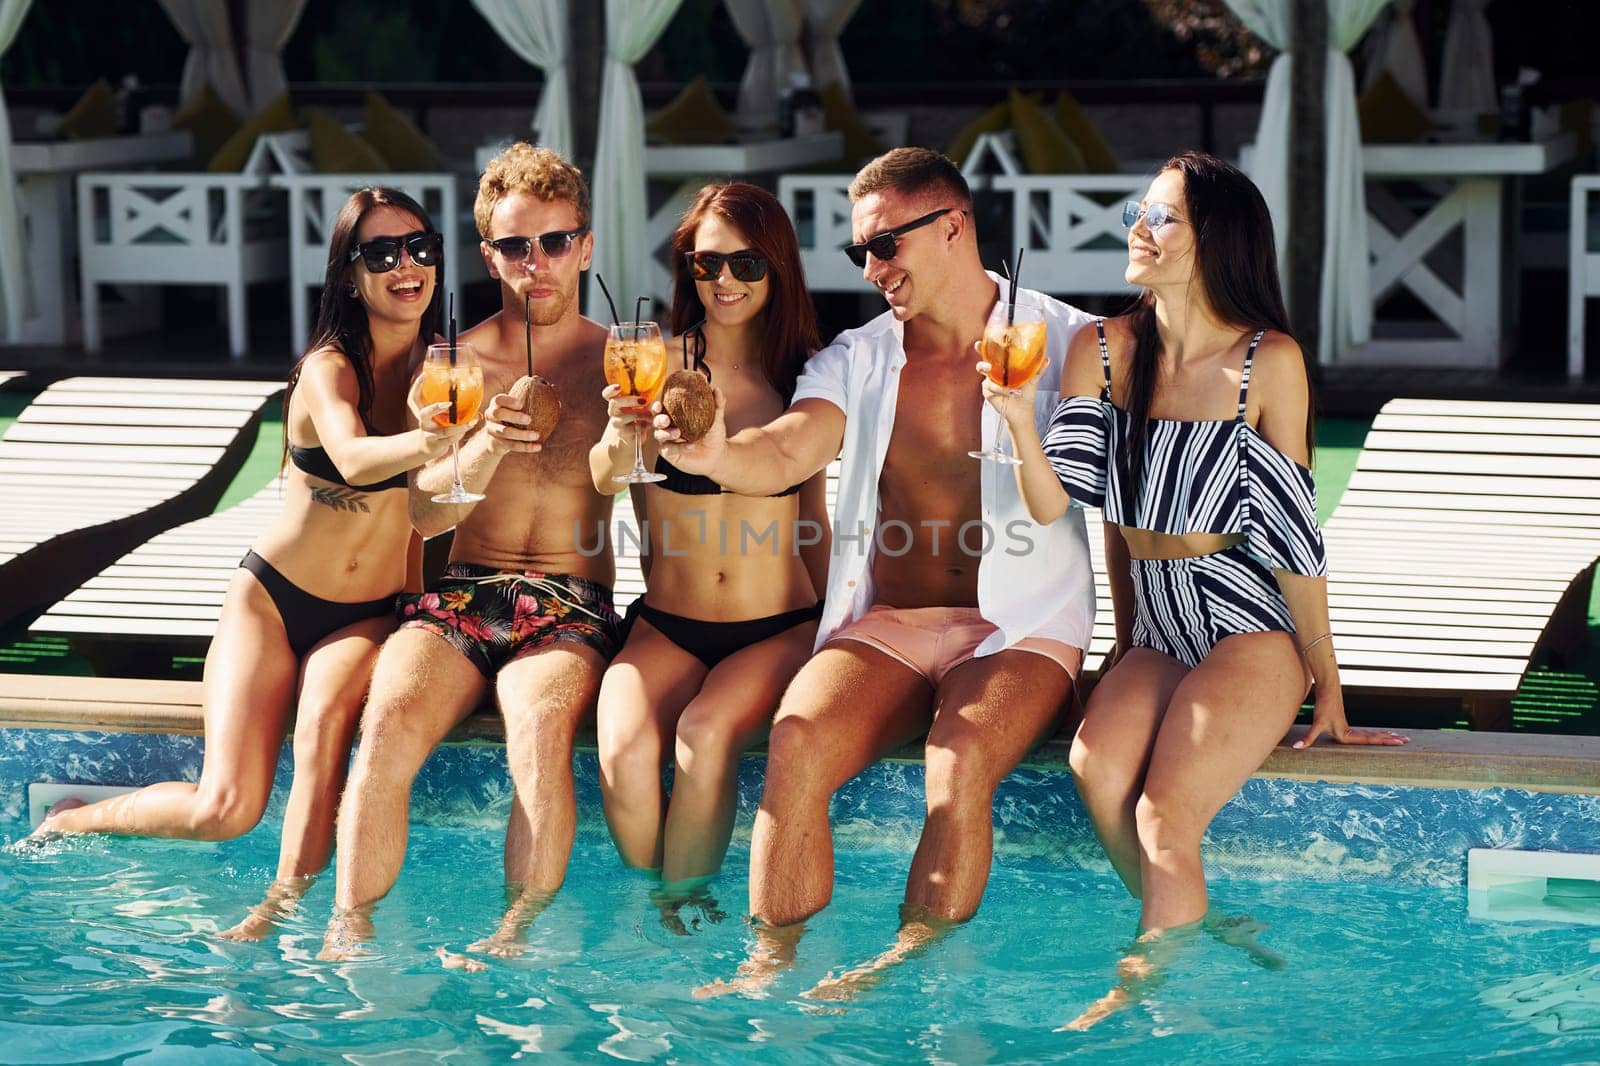 Group of young happy people have fun in swimming pool at daytime.